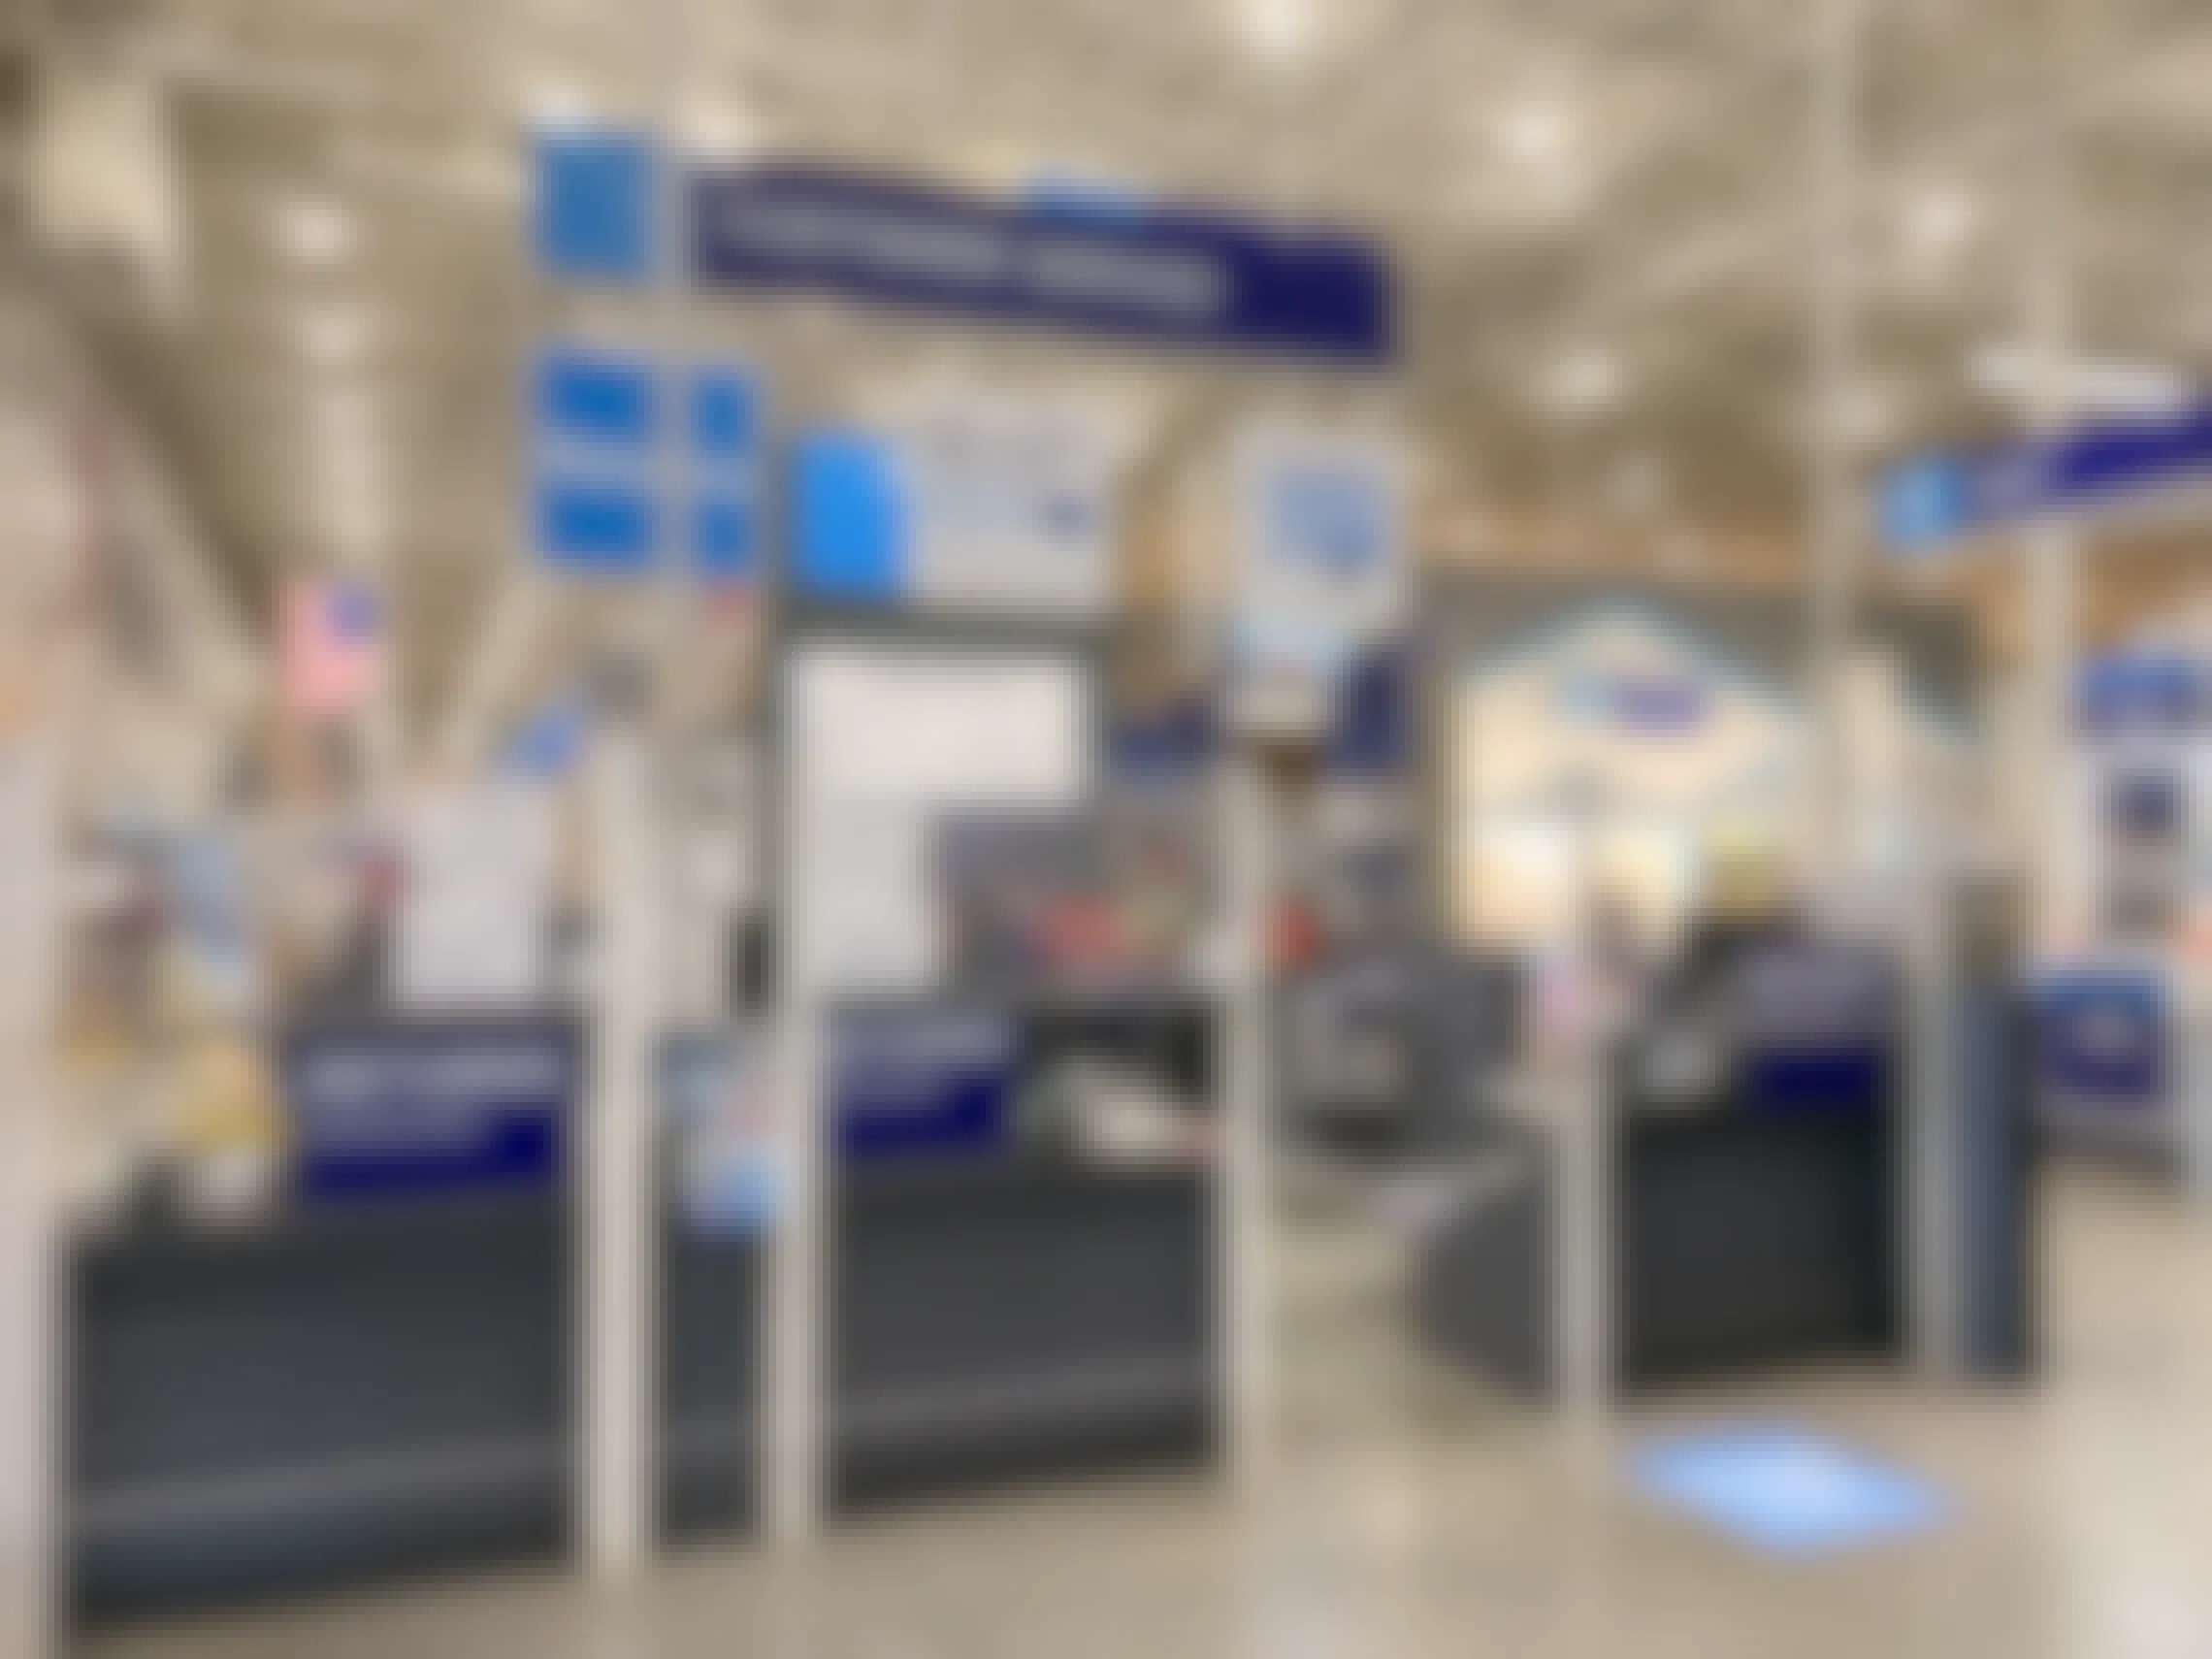 The Lowe's Customer Service desk and Return counter.